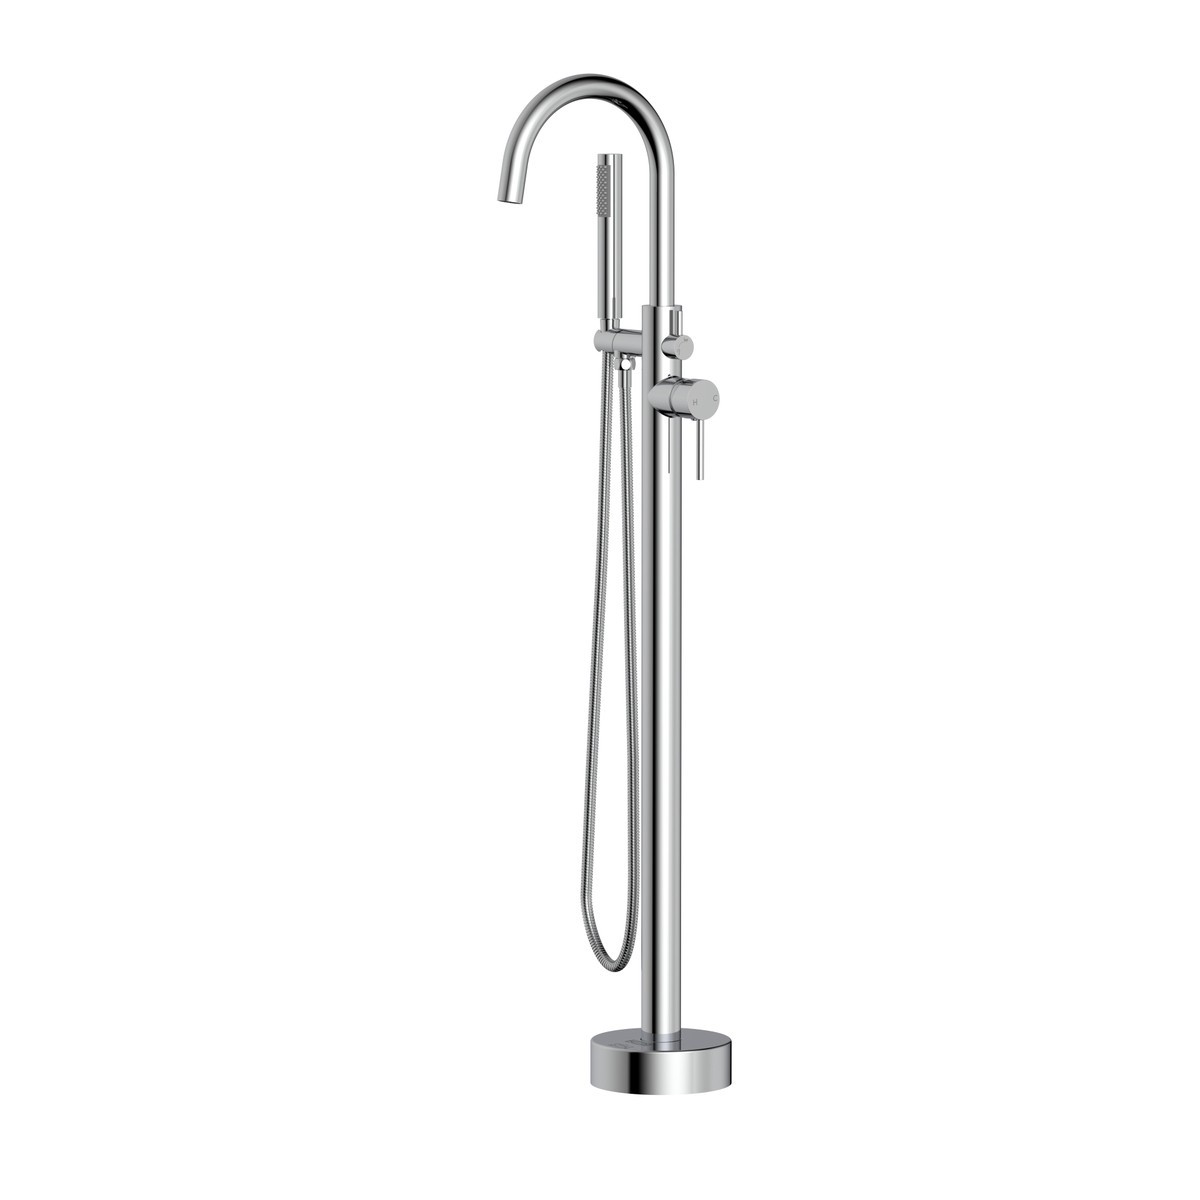 ELEGANT FURNITURE LIGHTING FAT-8001 STEVEN 45 INCH FLOOR MOUNTED ROMAN TUB FAUCET WITH HAND SHOWER